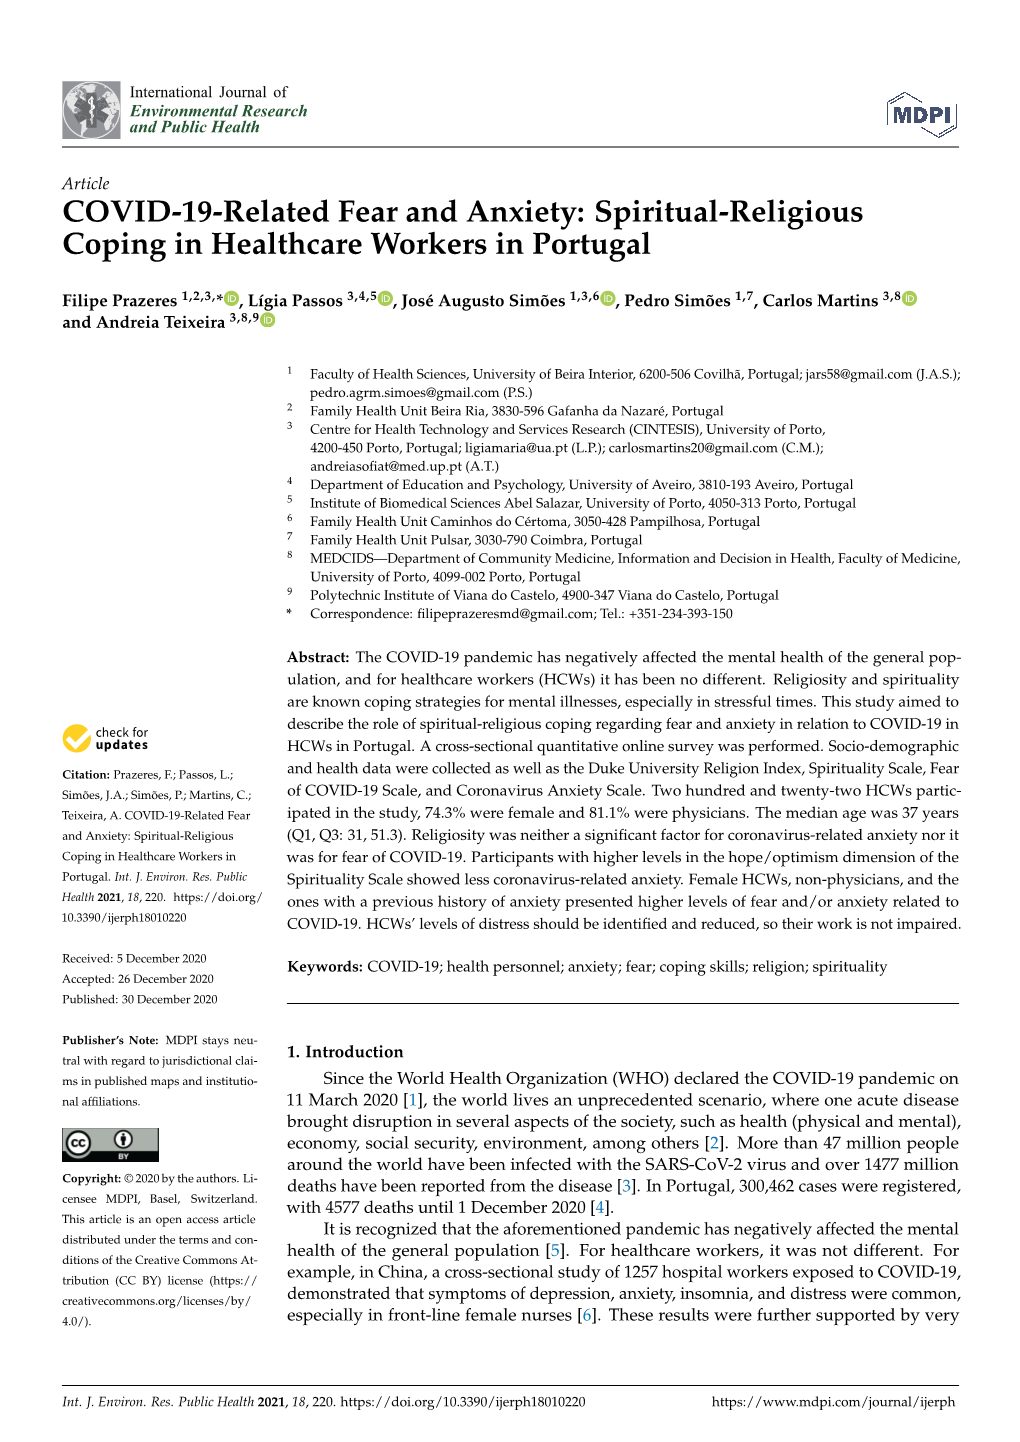 COVID-19-Related Fear and Anxiety: Spiritual-Religious Coping in Healthcare Workers in Portugal